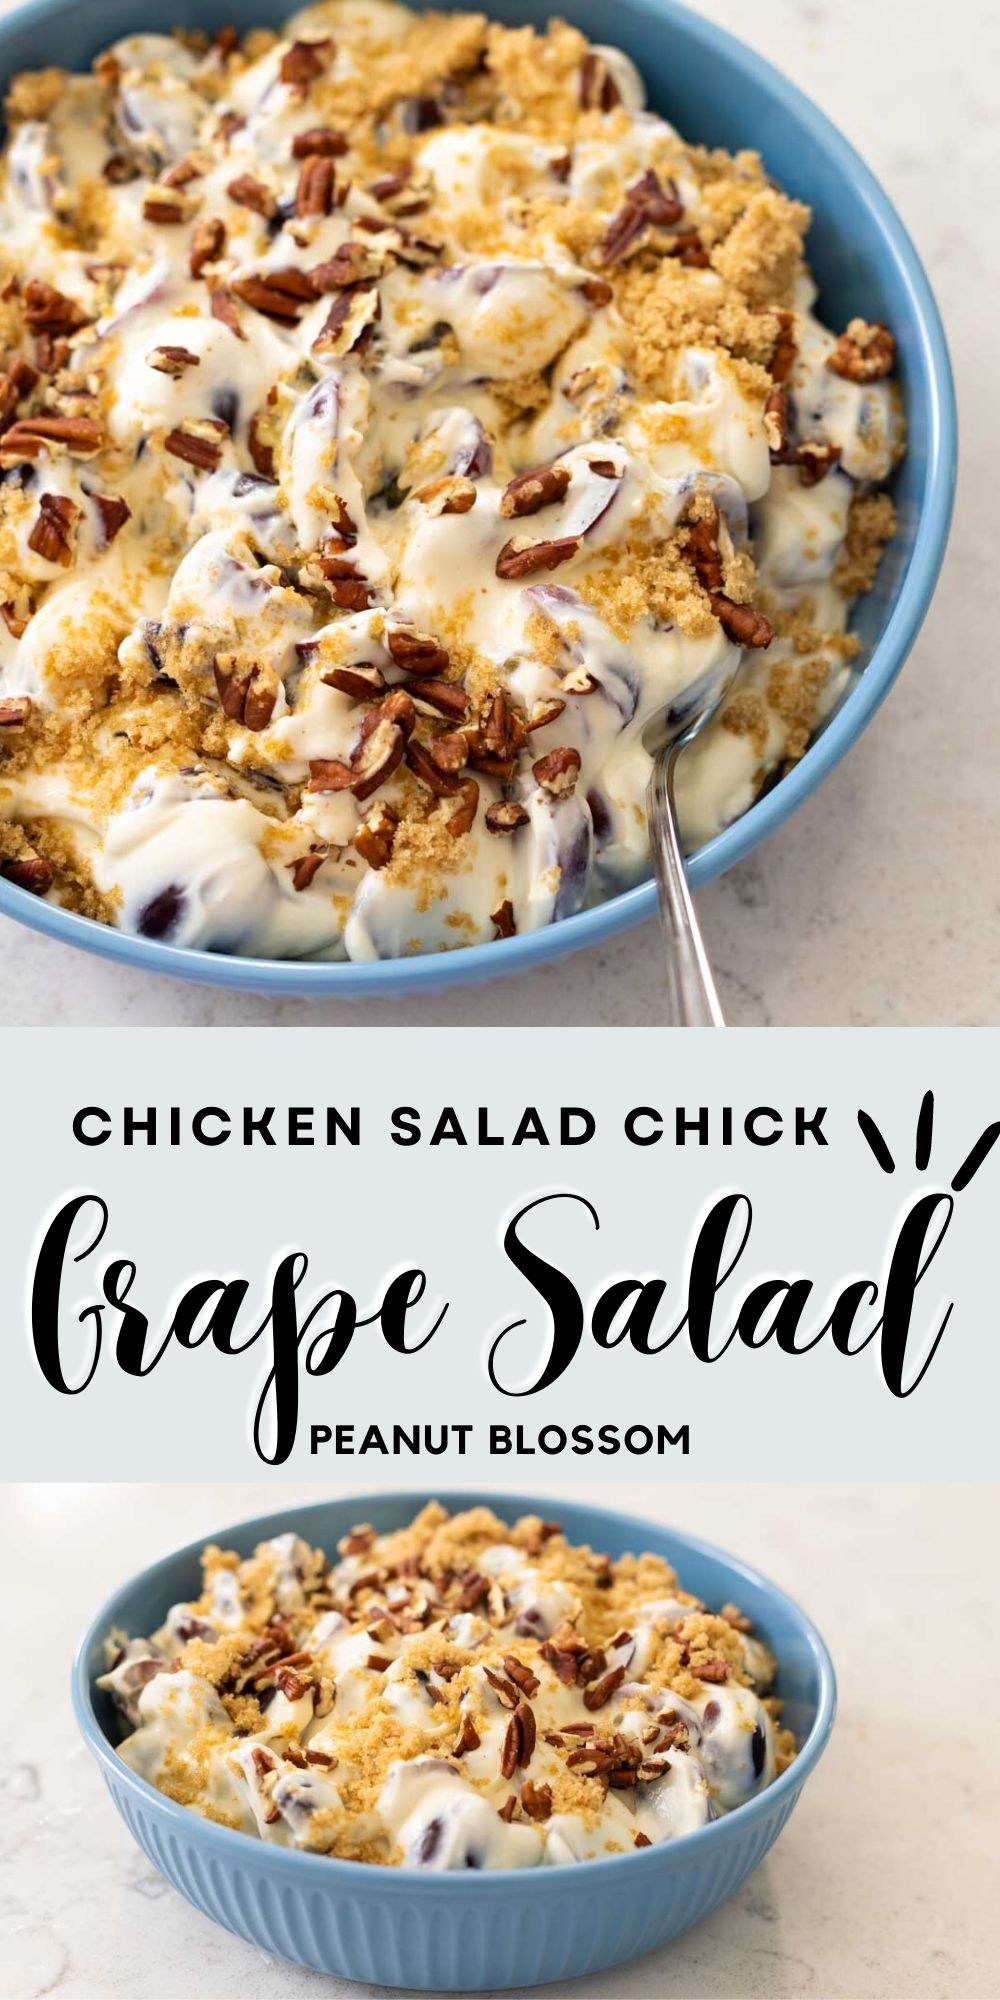 The creamy grape salad copycat recipe from Chicken Salad Chick is in a blue bowl.